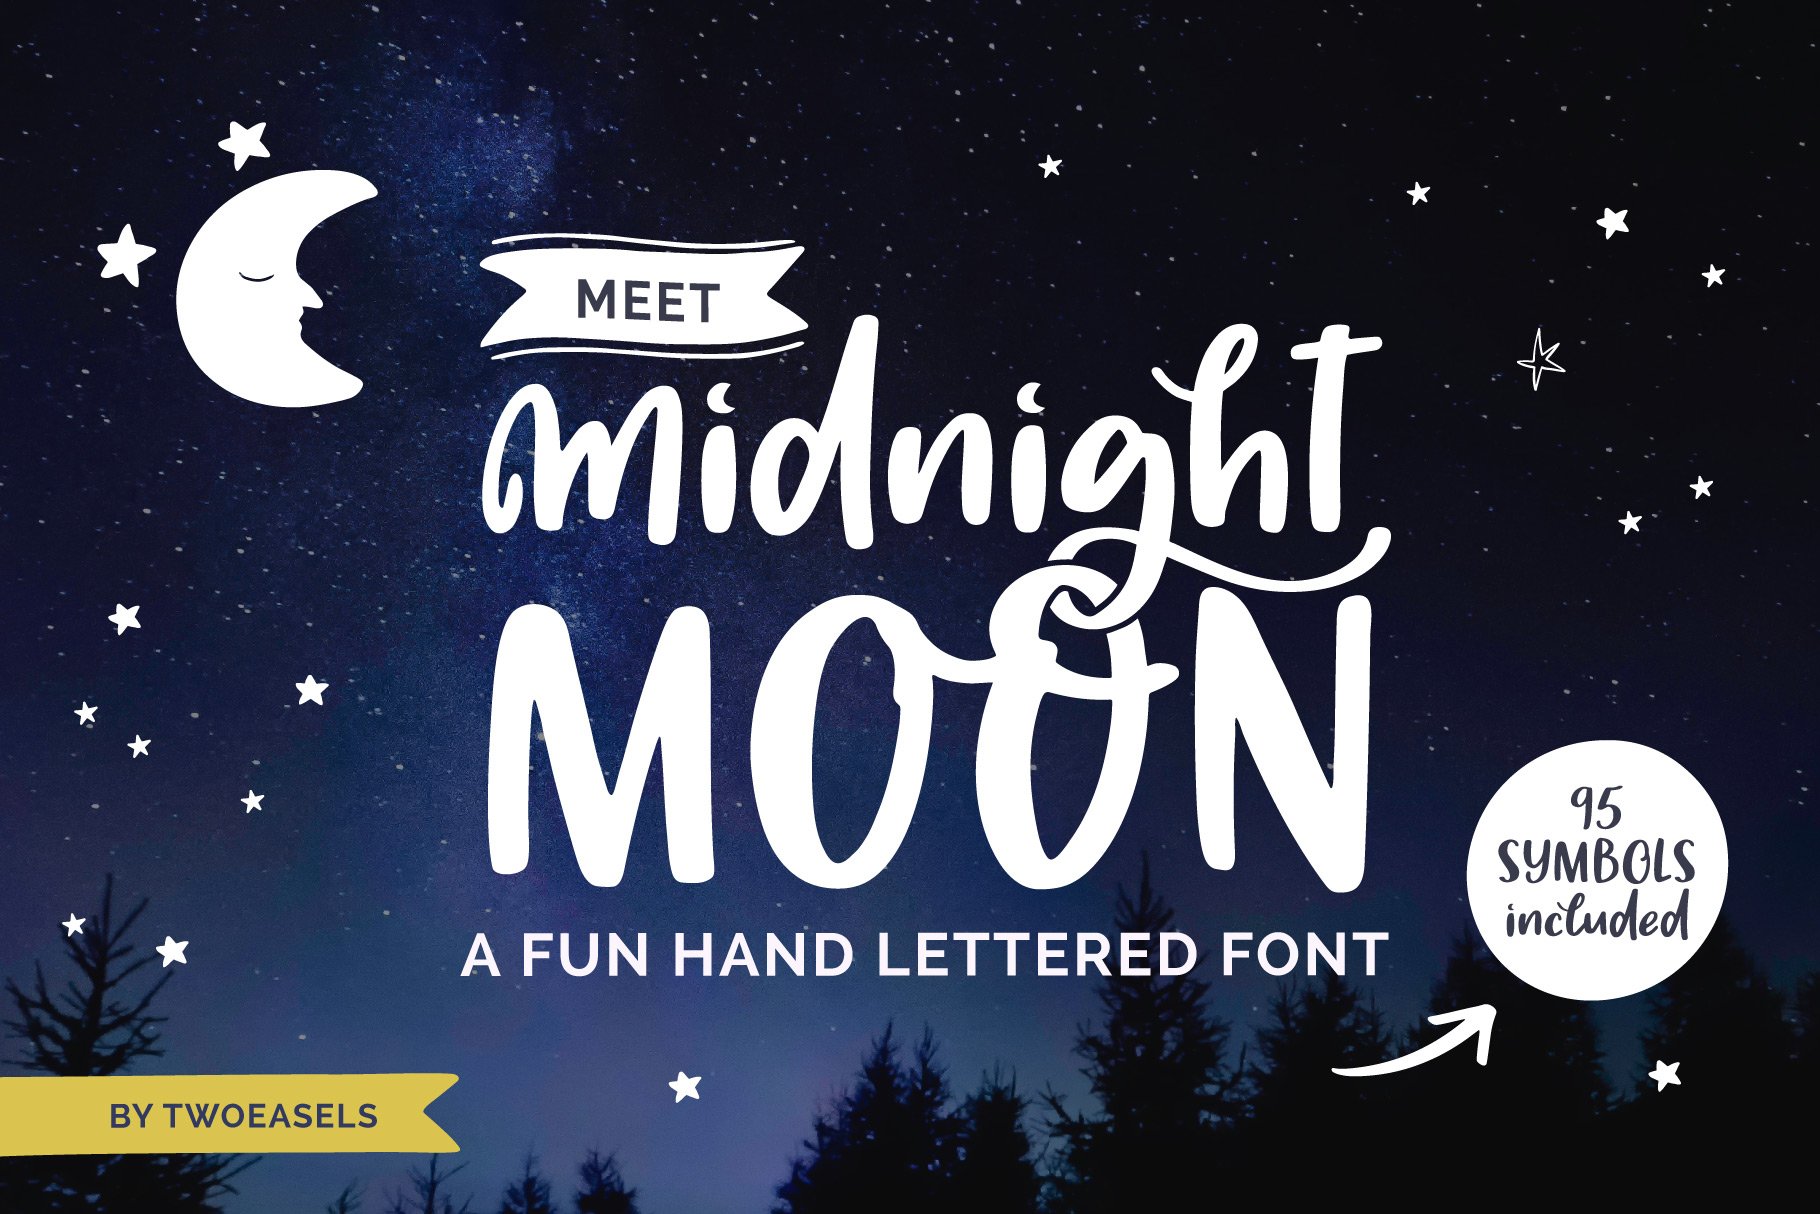 Midnight Moon Font and Symbols cover image.